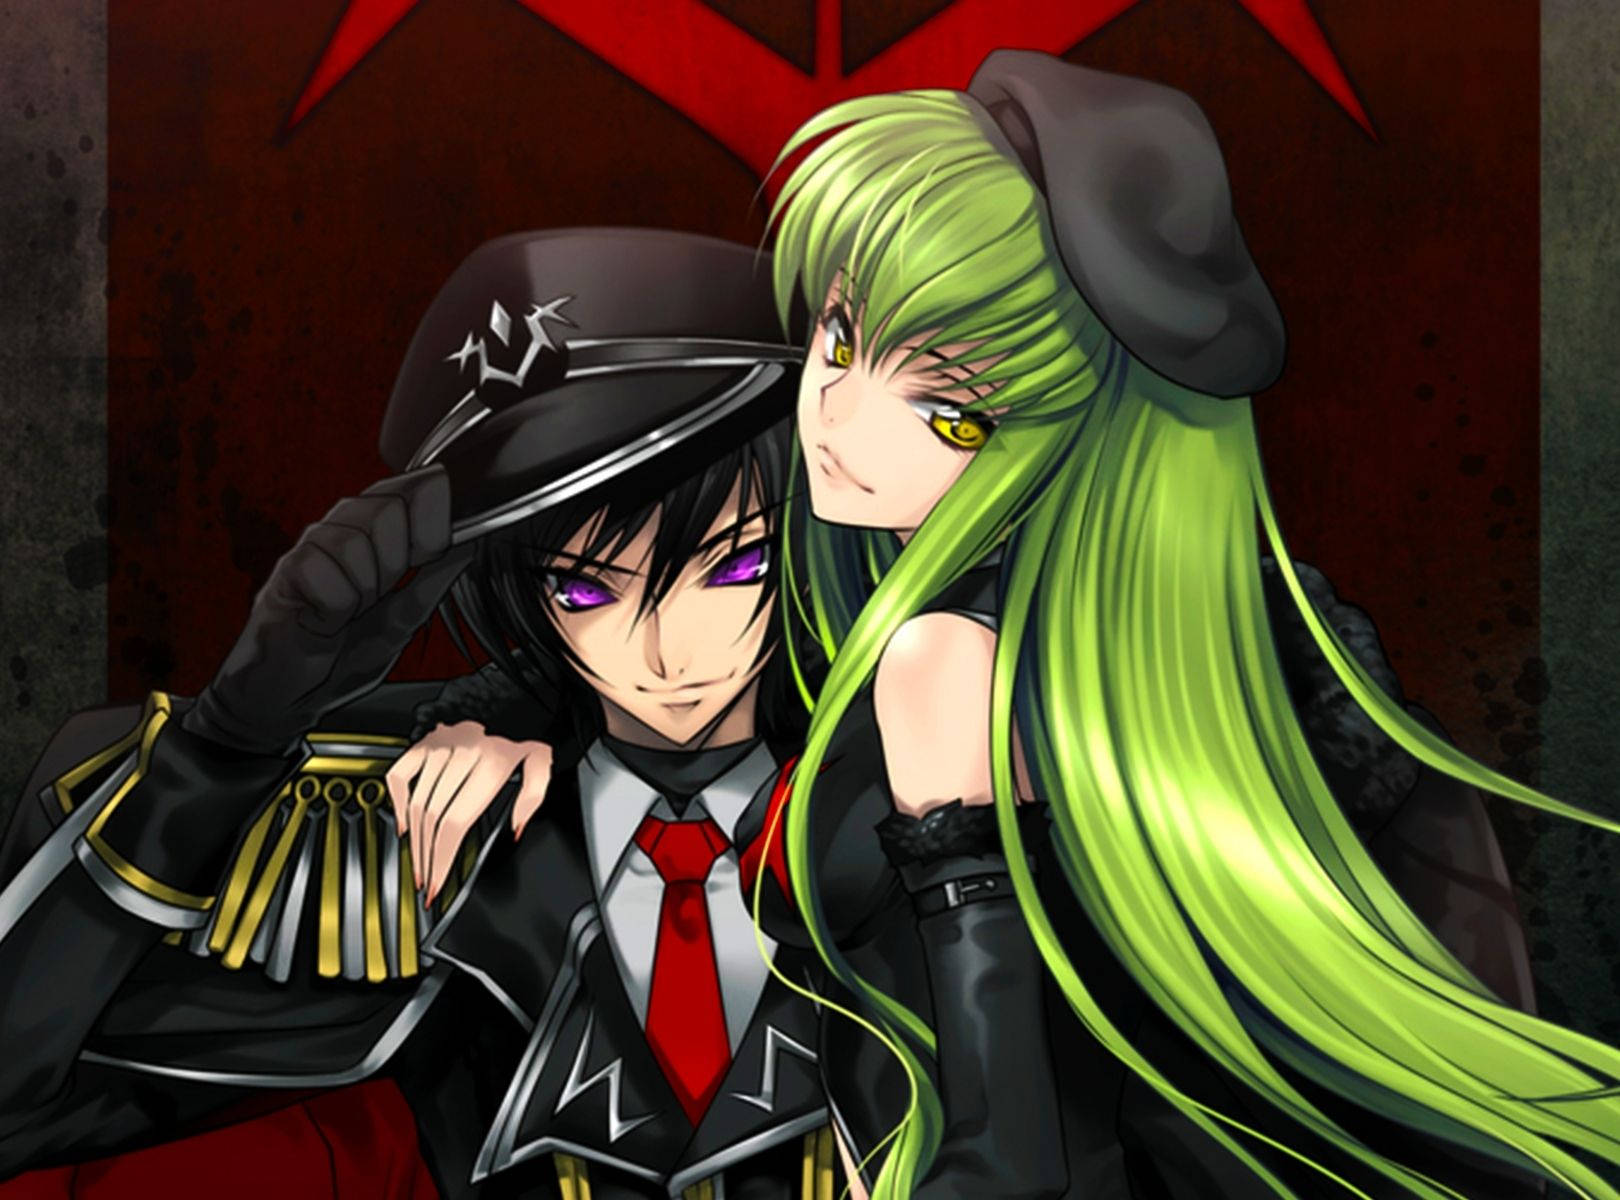 C.c And Lelouch In Black Code Geass